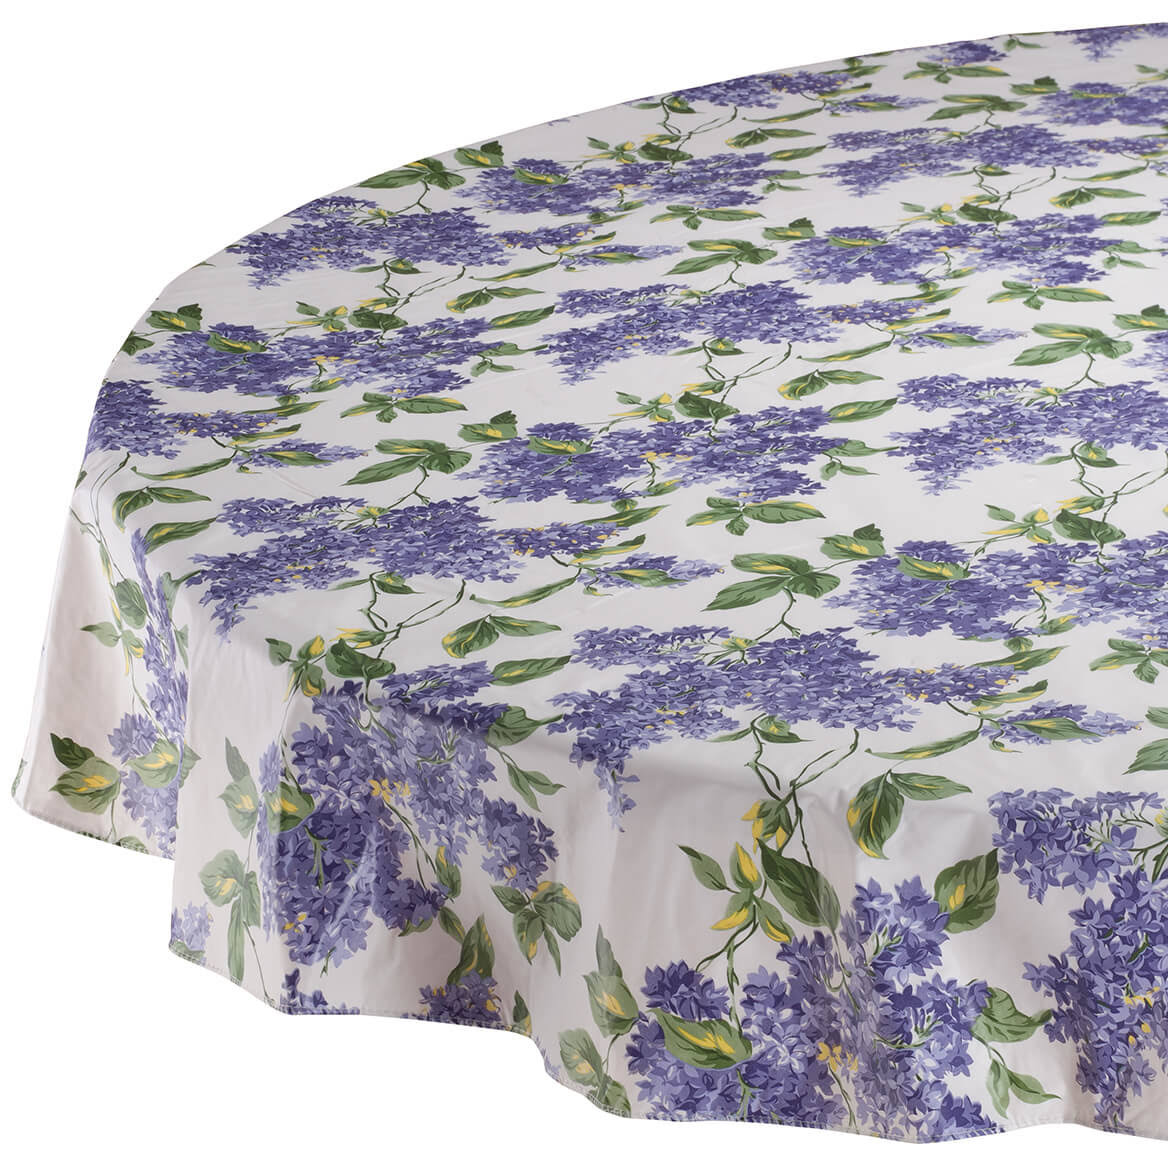 Fresh Lilac Premium Vinyl Table Cover | Textiles | Delivery Guaranteed | 30 Day Money Back Guarantee | Free Shipping on All Orders